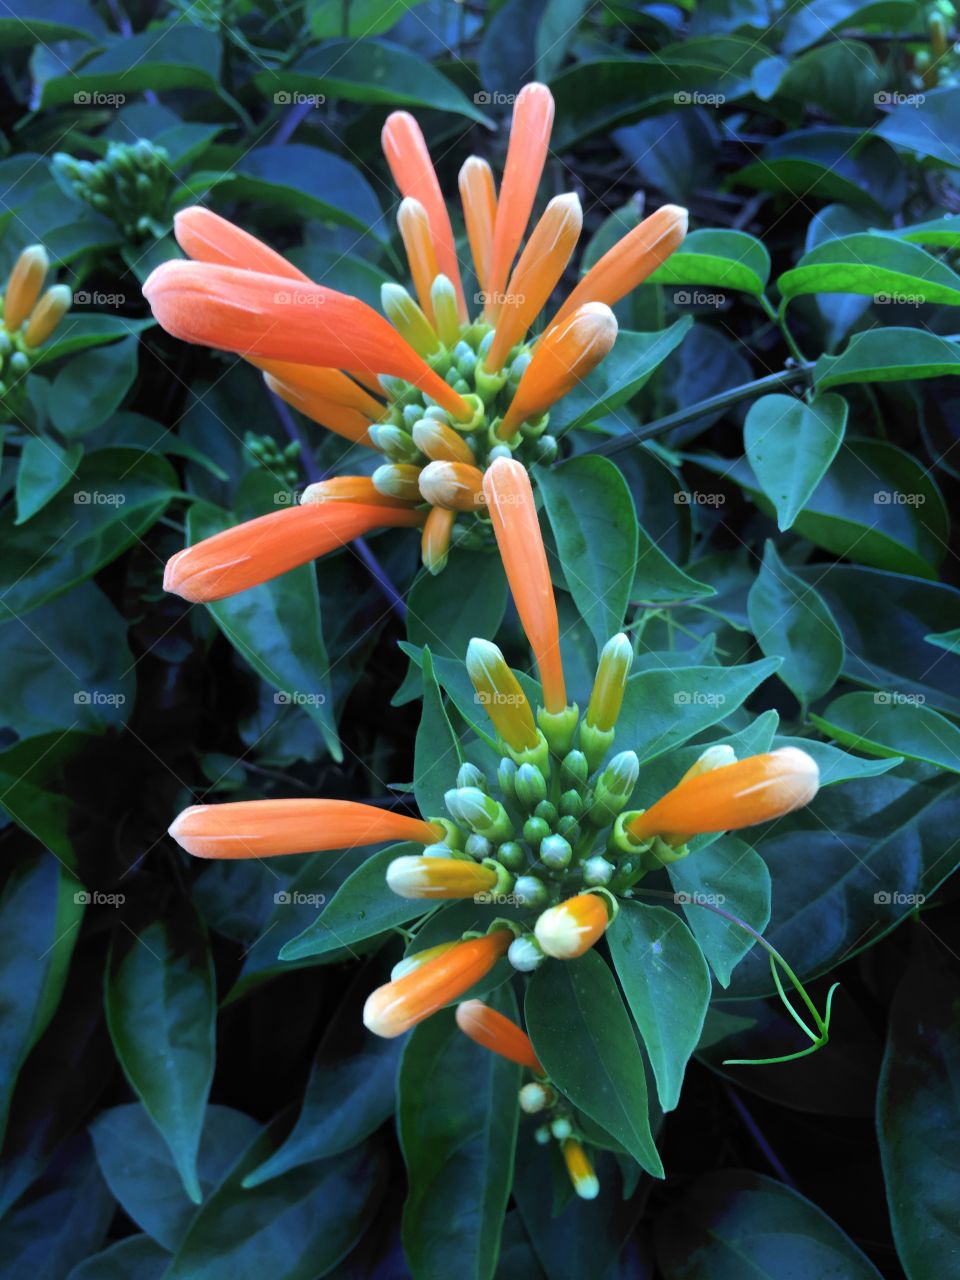 Tropical flowers exploding orange and yellow